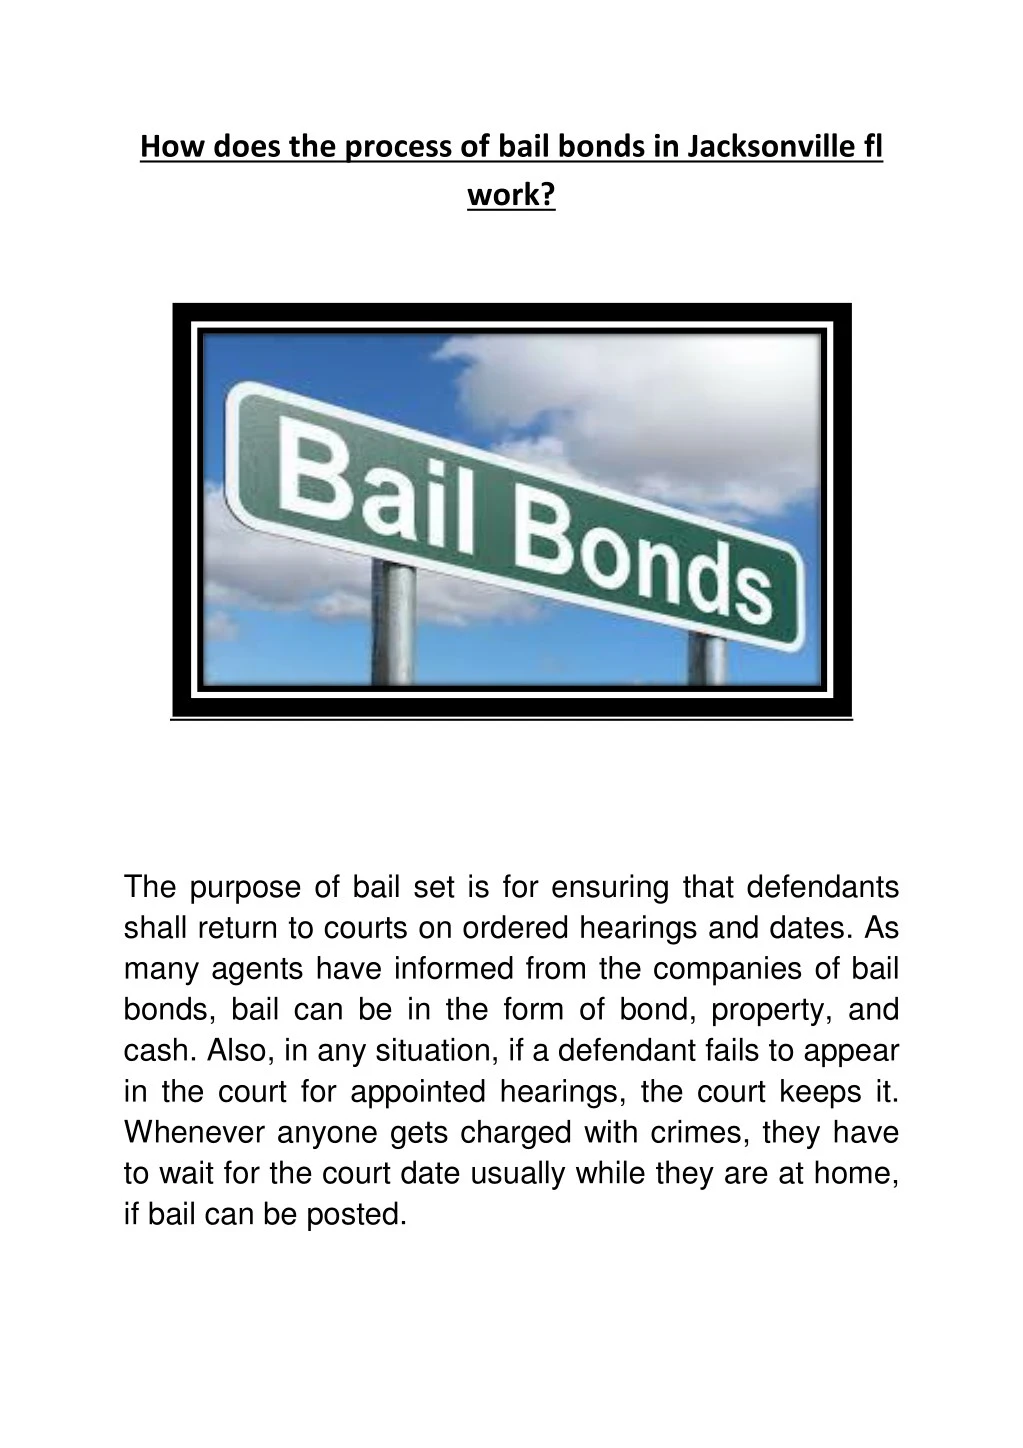 how does the process of bail bonds